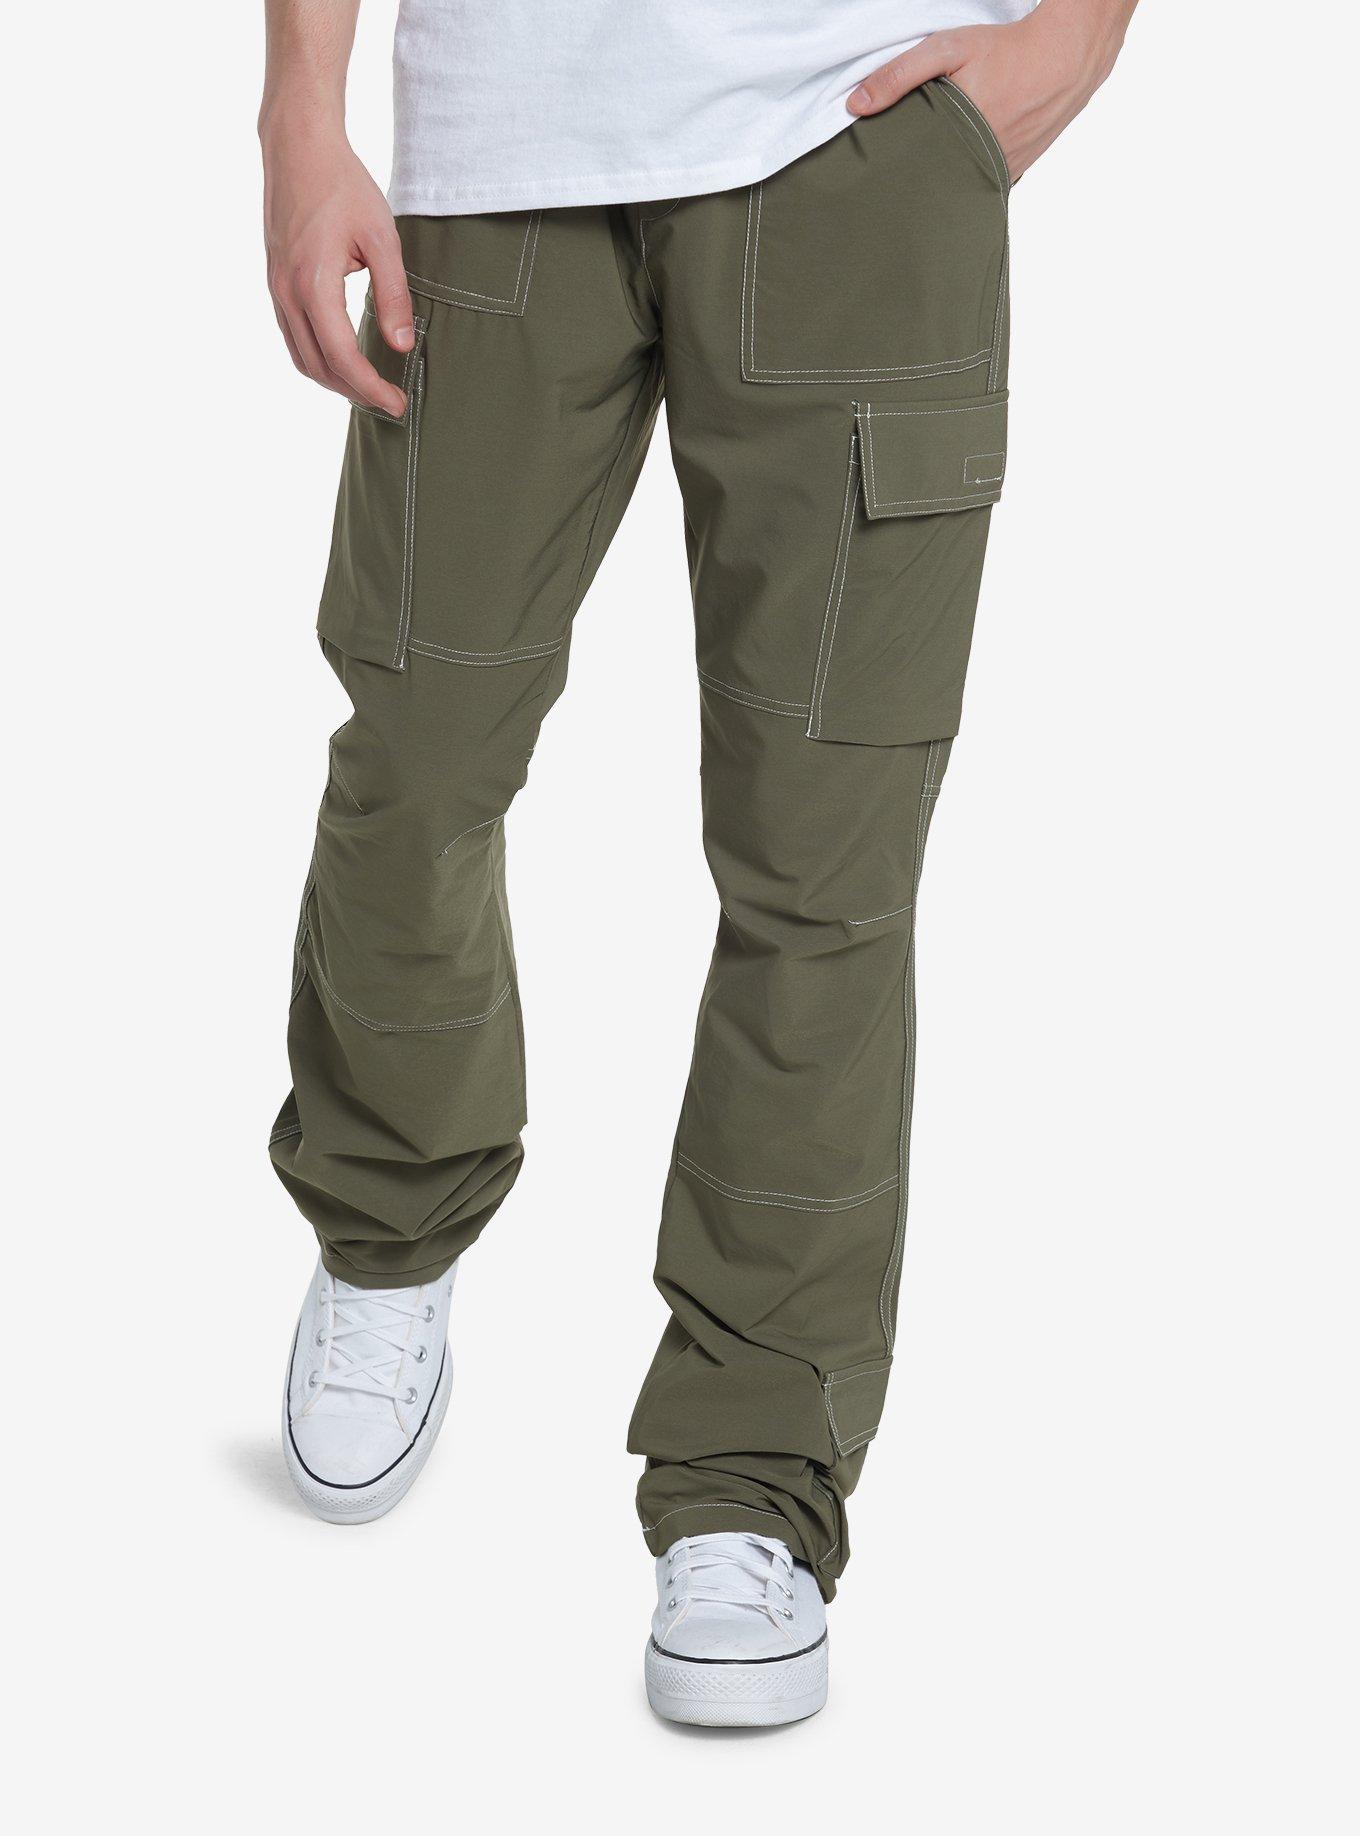 Olive Green Contrast Stitch Cargo Pants | Hot Topic